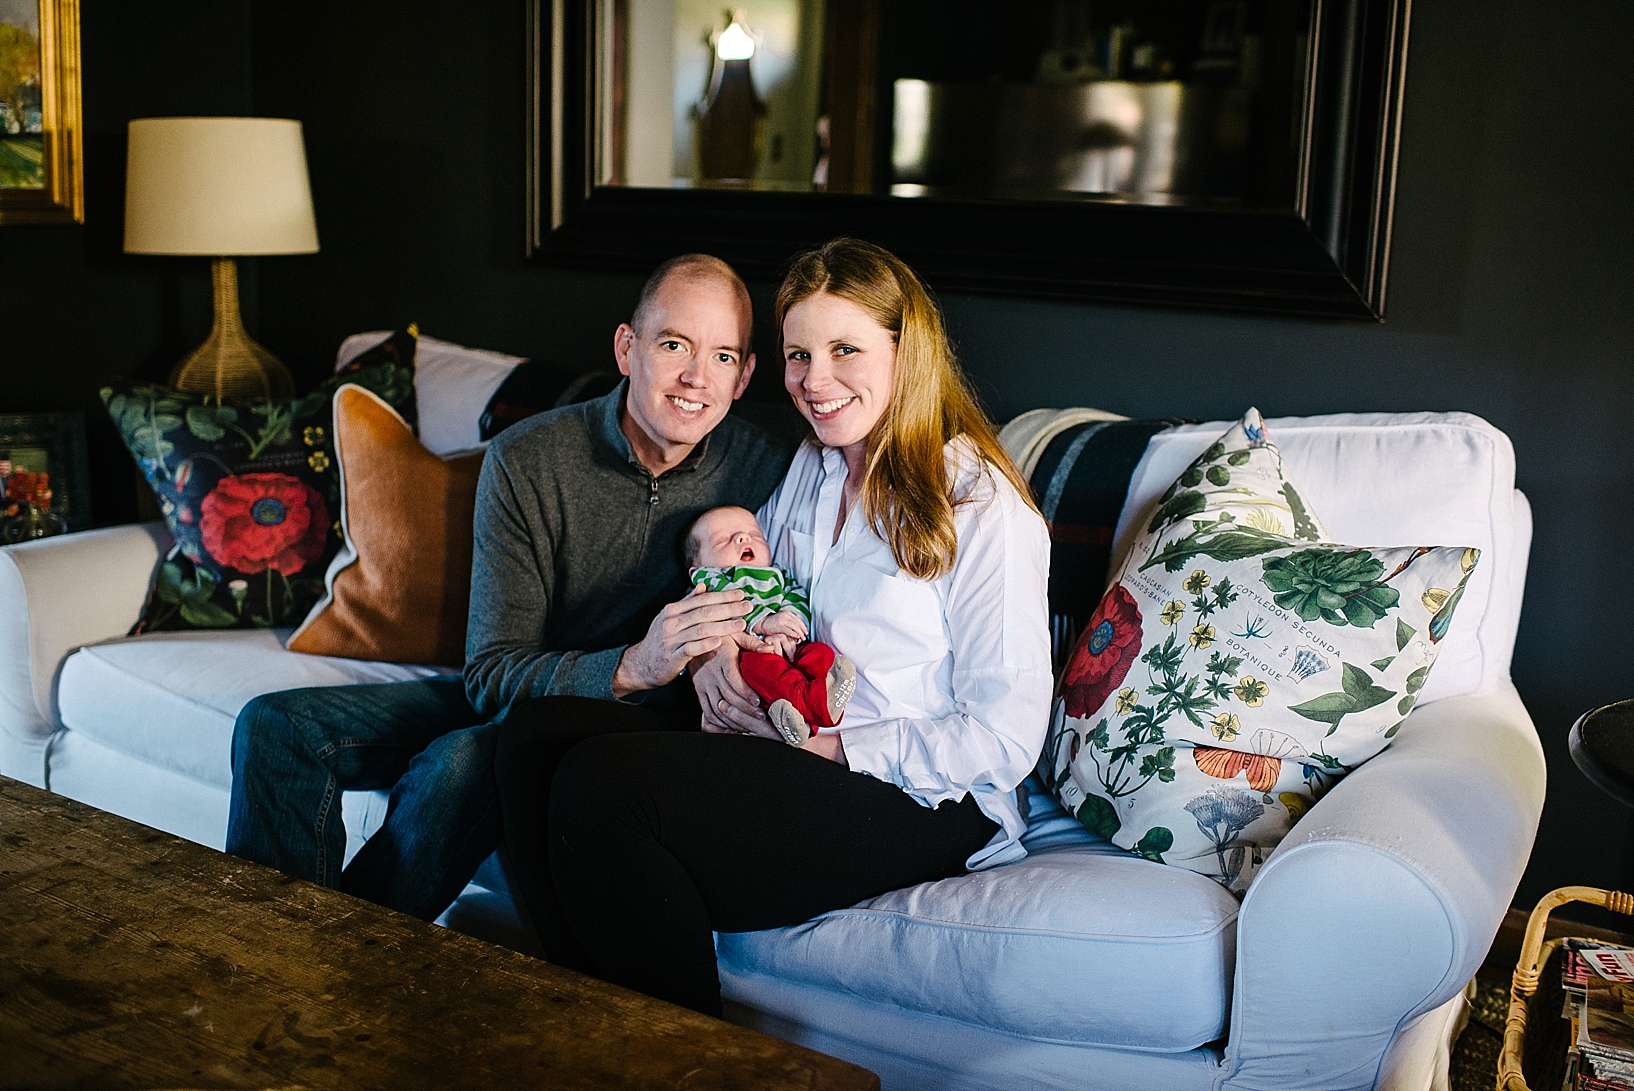 parents holding newborn sitting on living room couch smiling